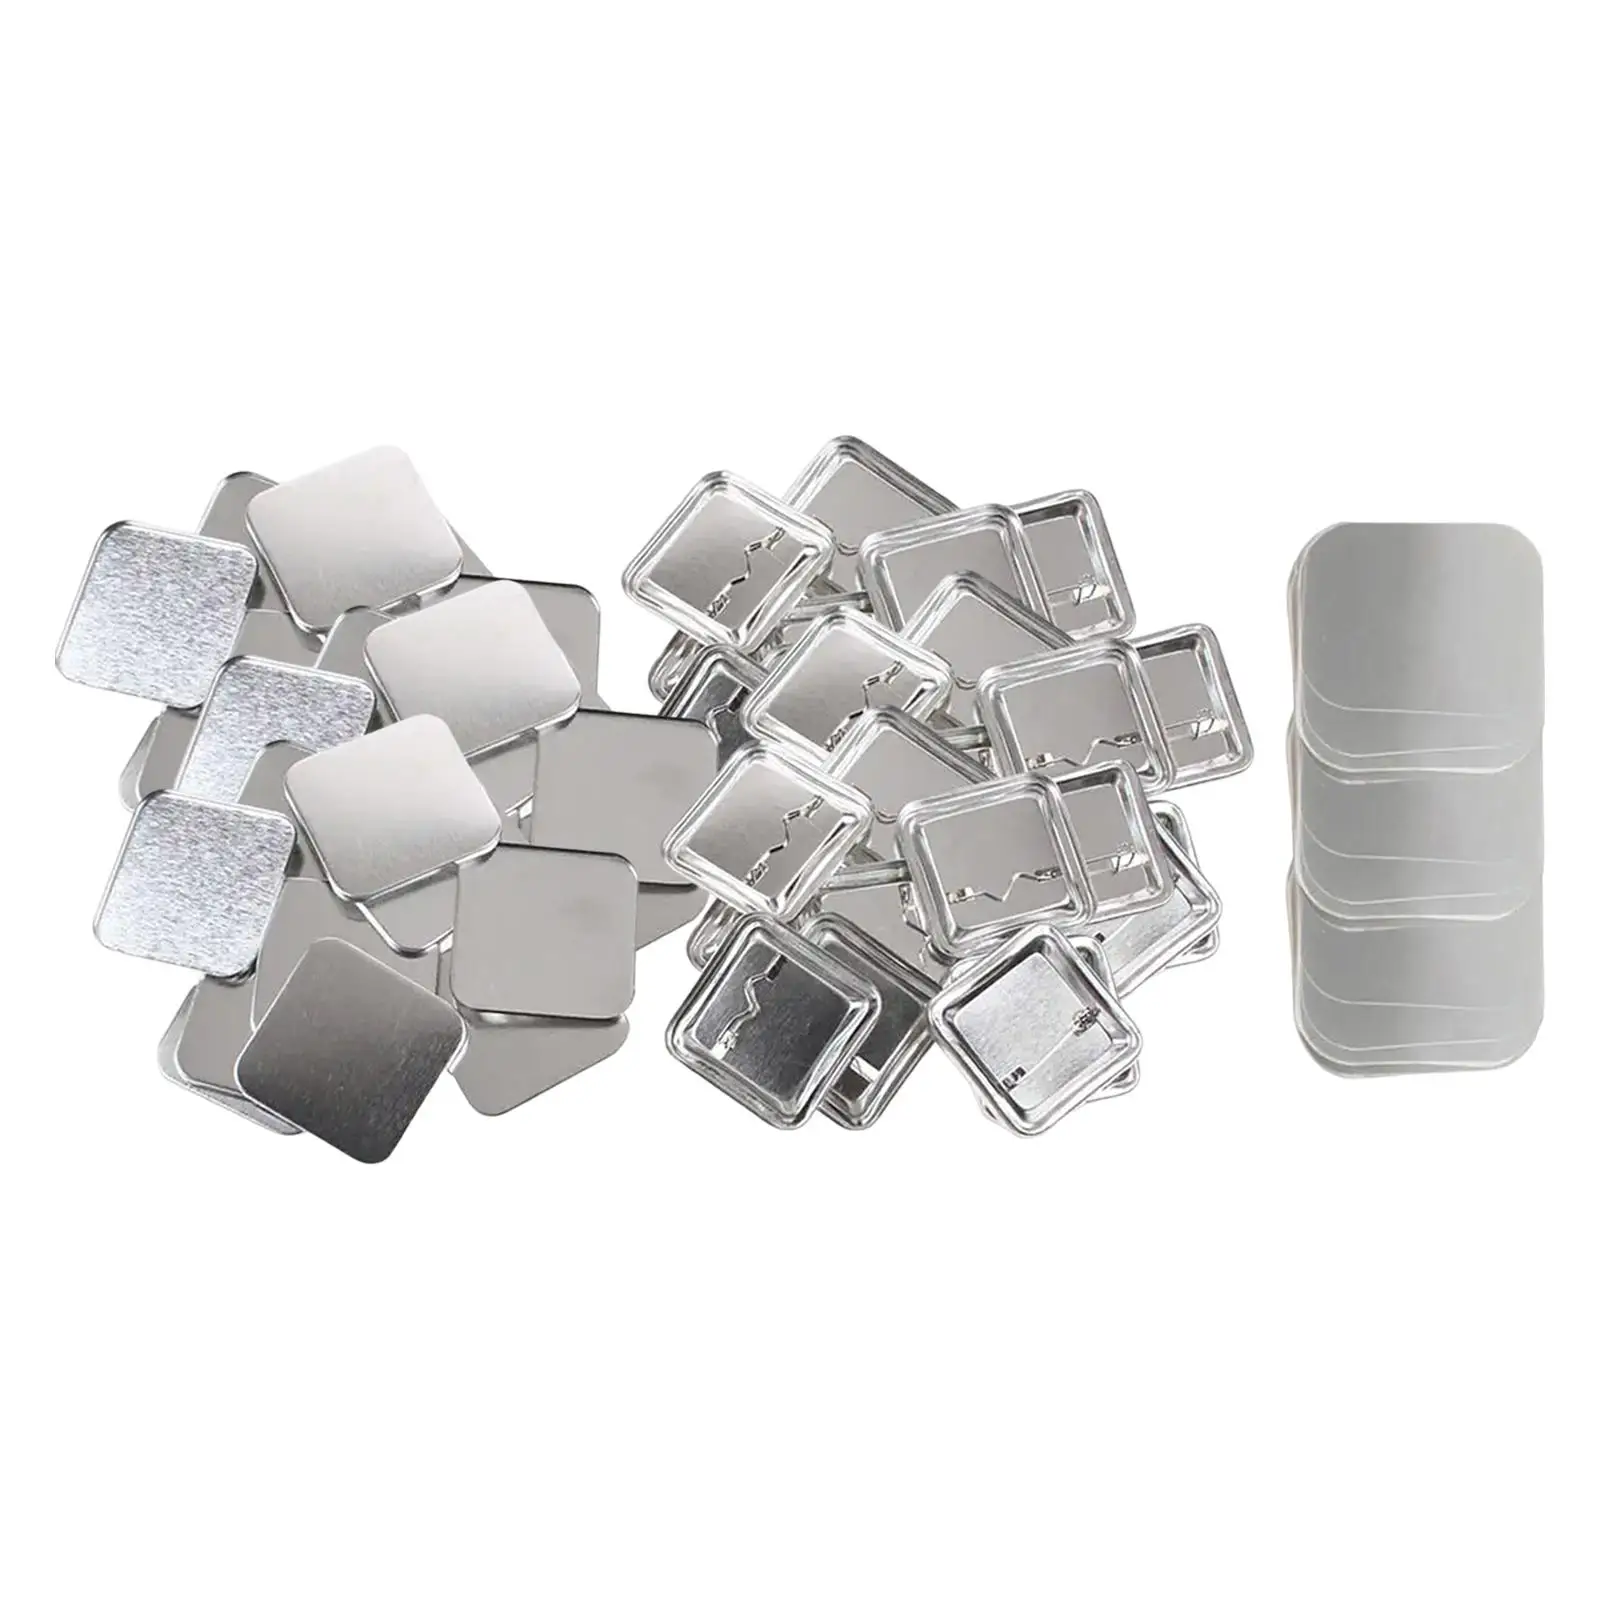 100Sets Blank Button Badge Parts Clear Mylar Component Metal Shells Button Maker for DIY Souvenirs Jewelry Making Gifts Craft